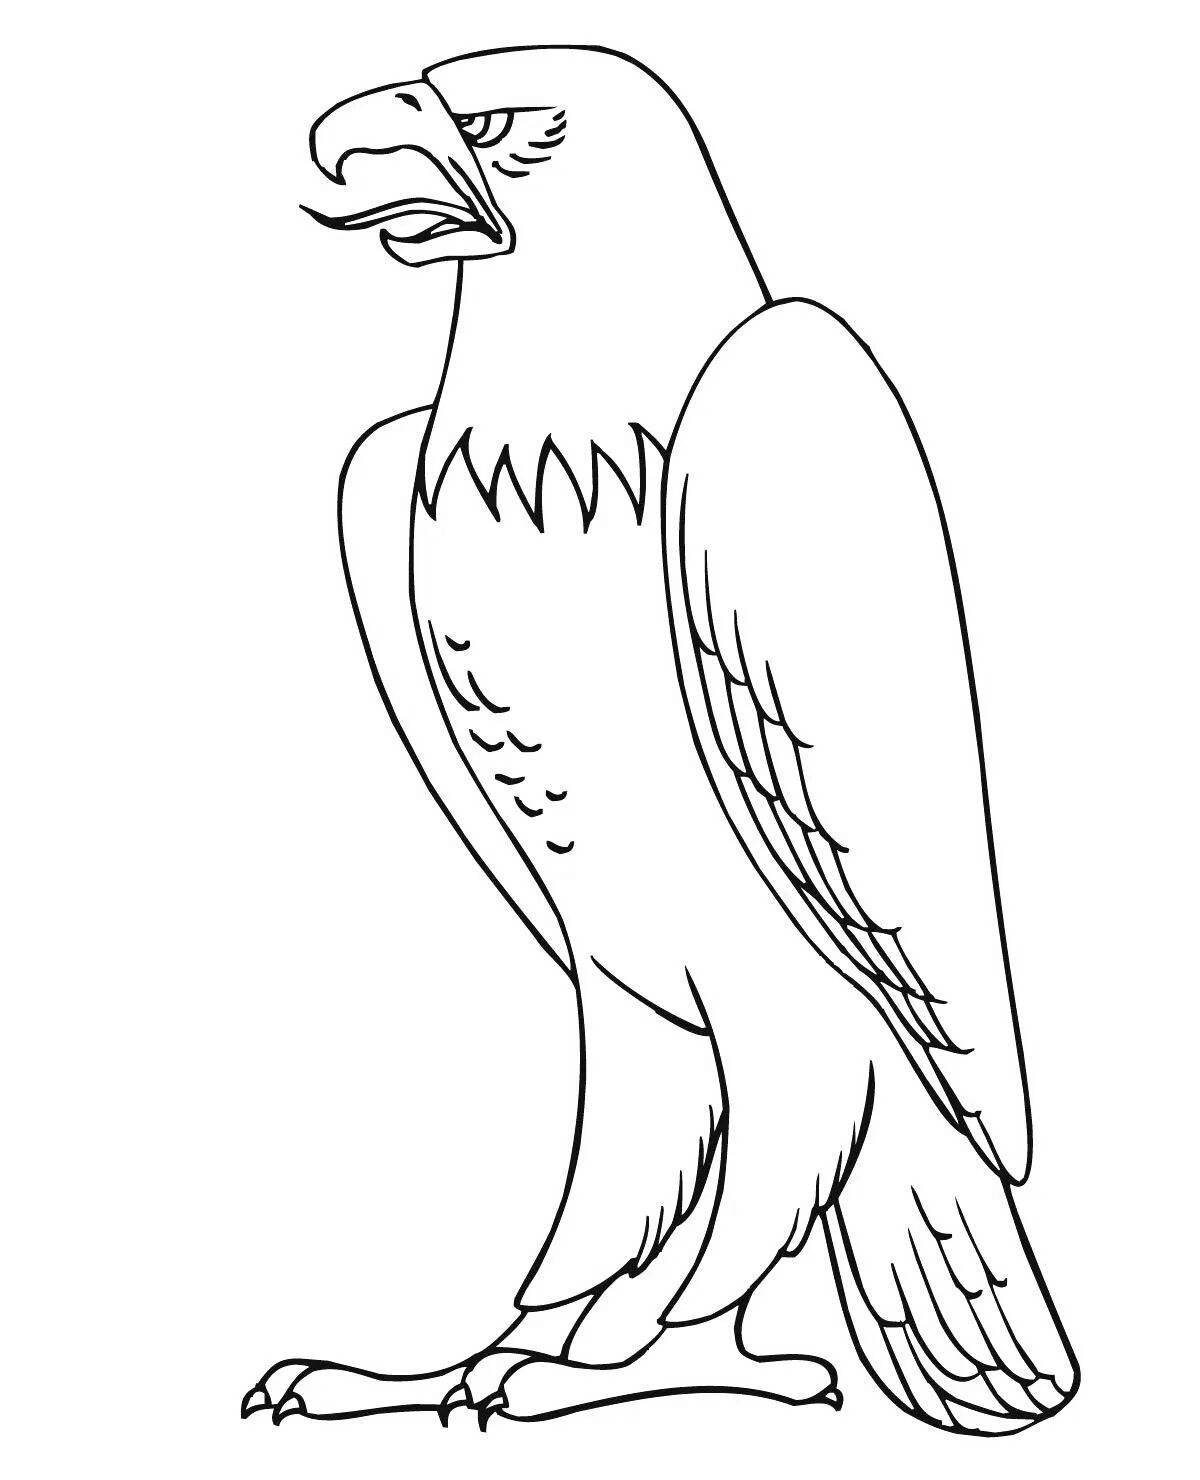 Radiant white-tailed eagle coloring page